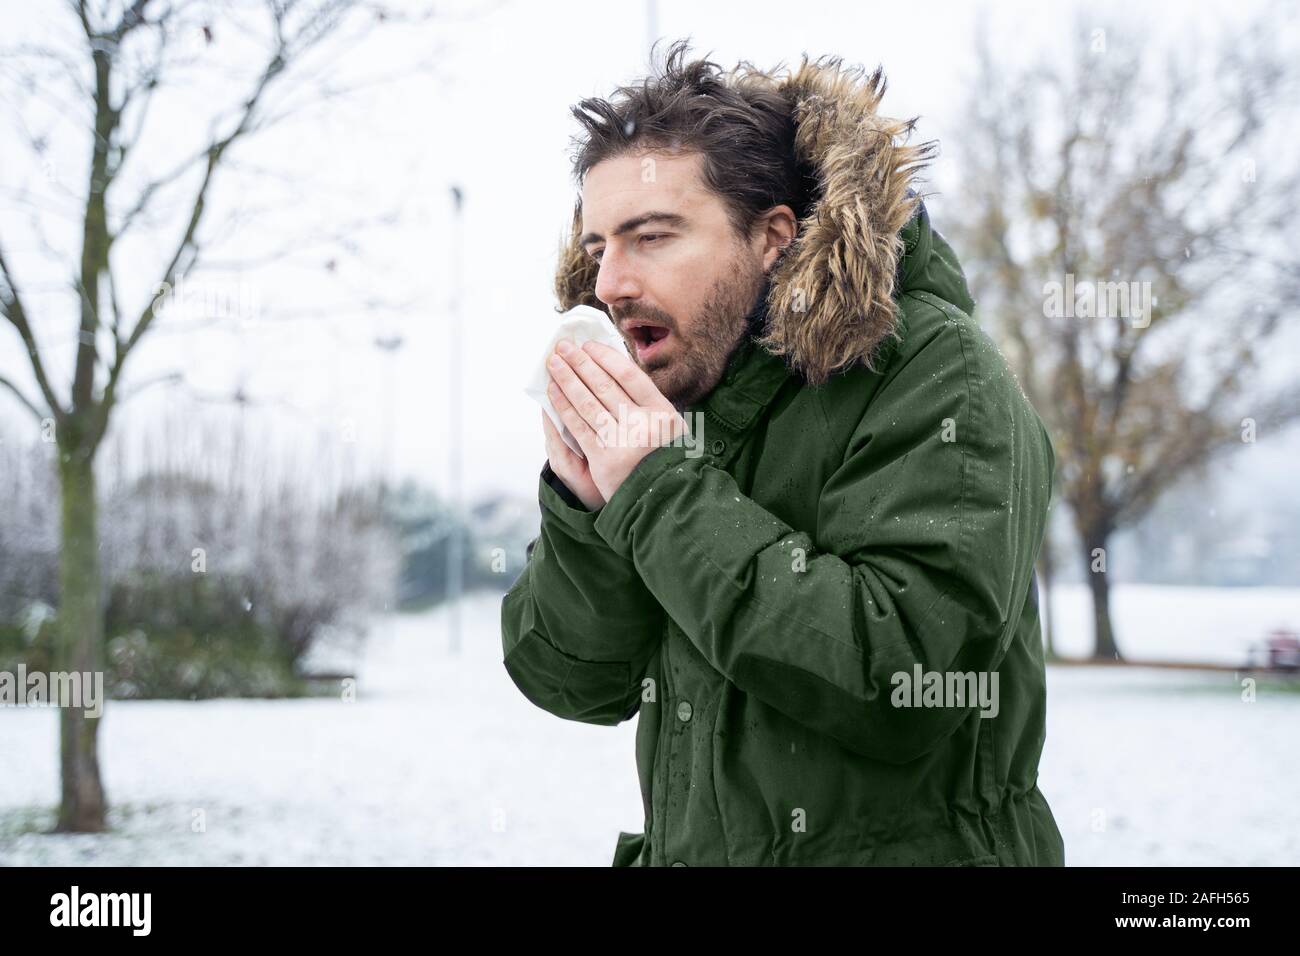 Man wearing warm clothes freezing in the snow Stock Photo